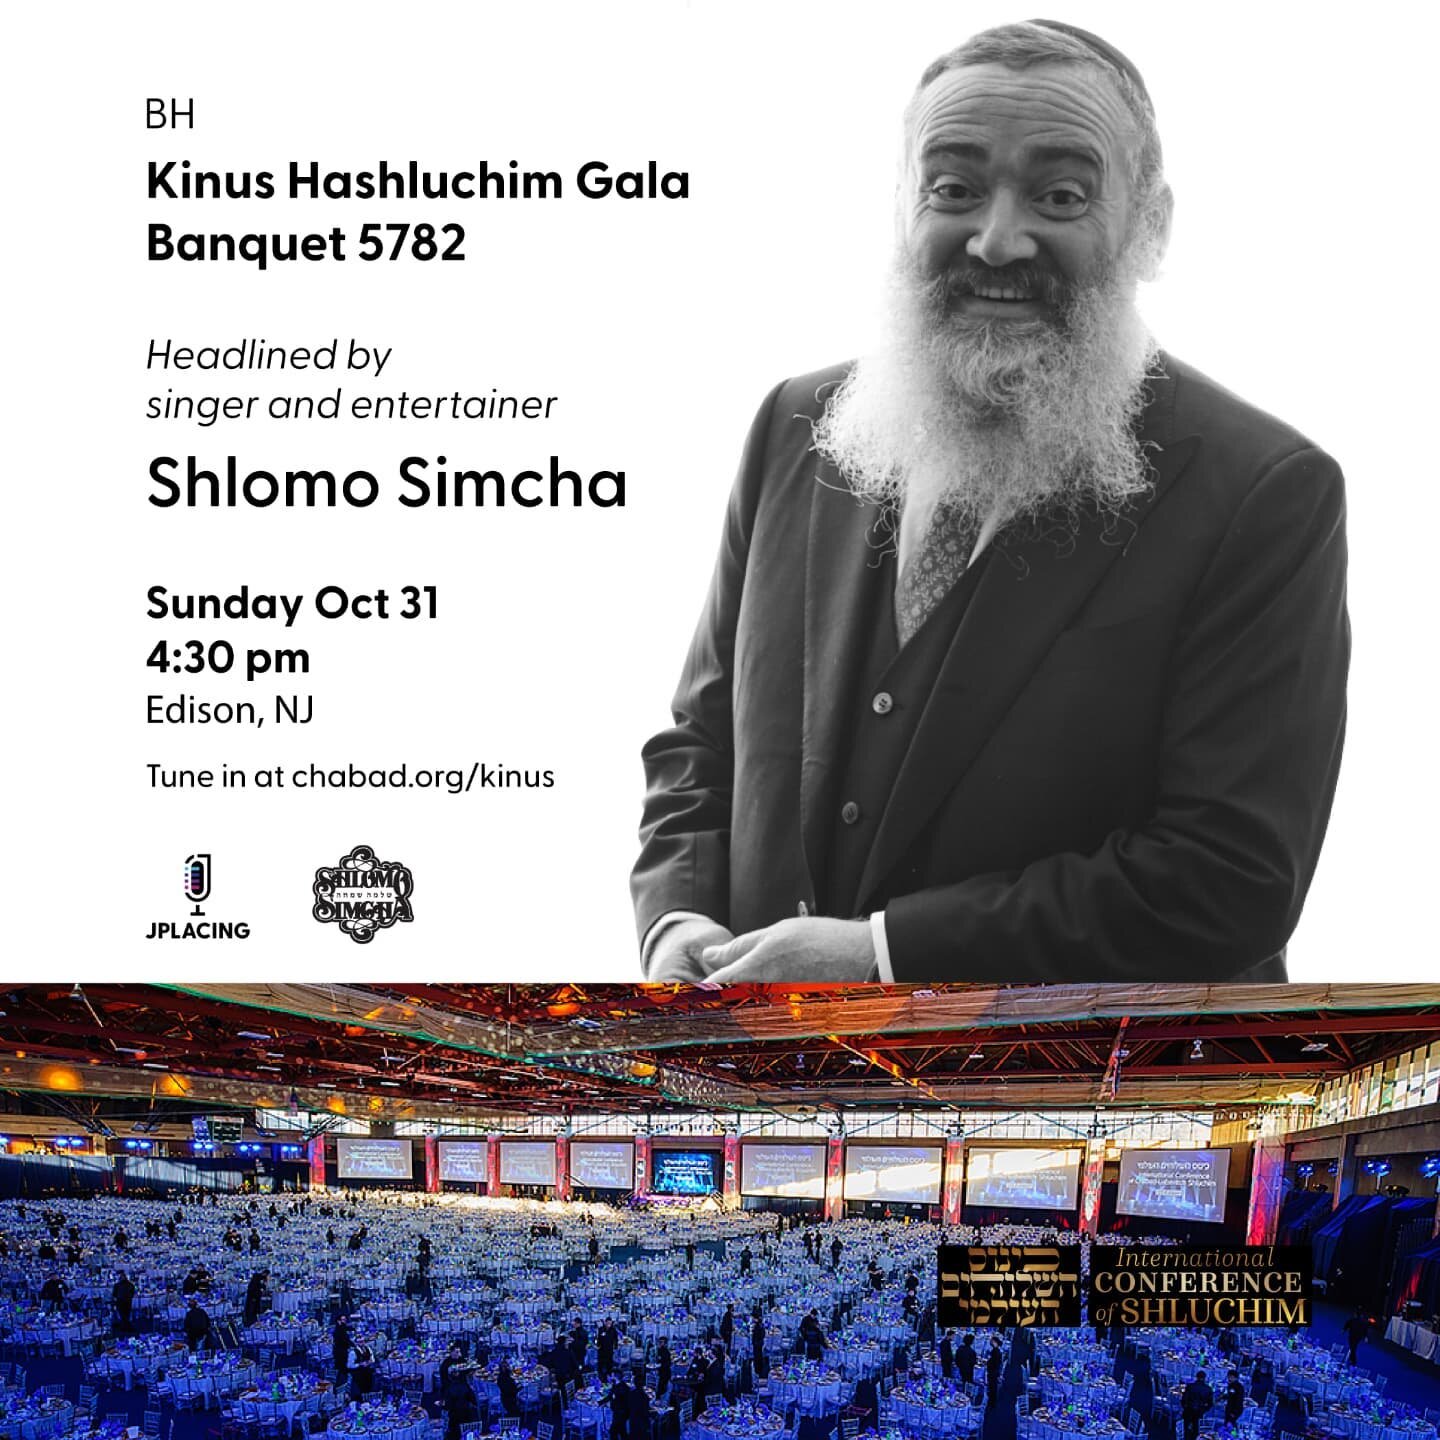 Looking forward to singing at this special gathering which my agent likes to call the &quot;Chabad superbowl event&quot;. 

After a hiatus due to covid it's an honor to entertain at the first in person Kinus since covid began. 

While access is limit